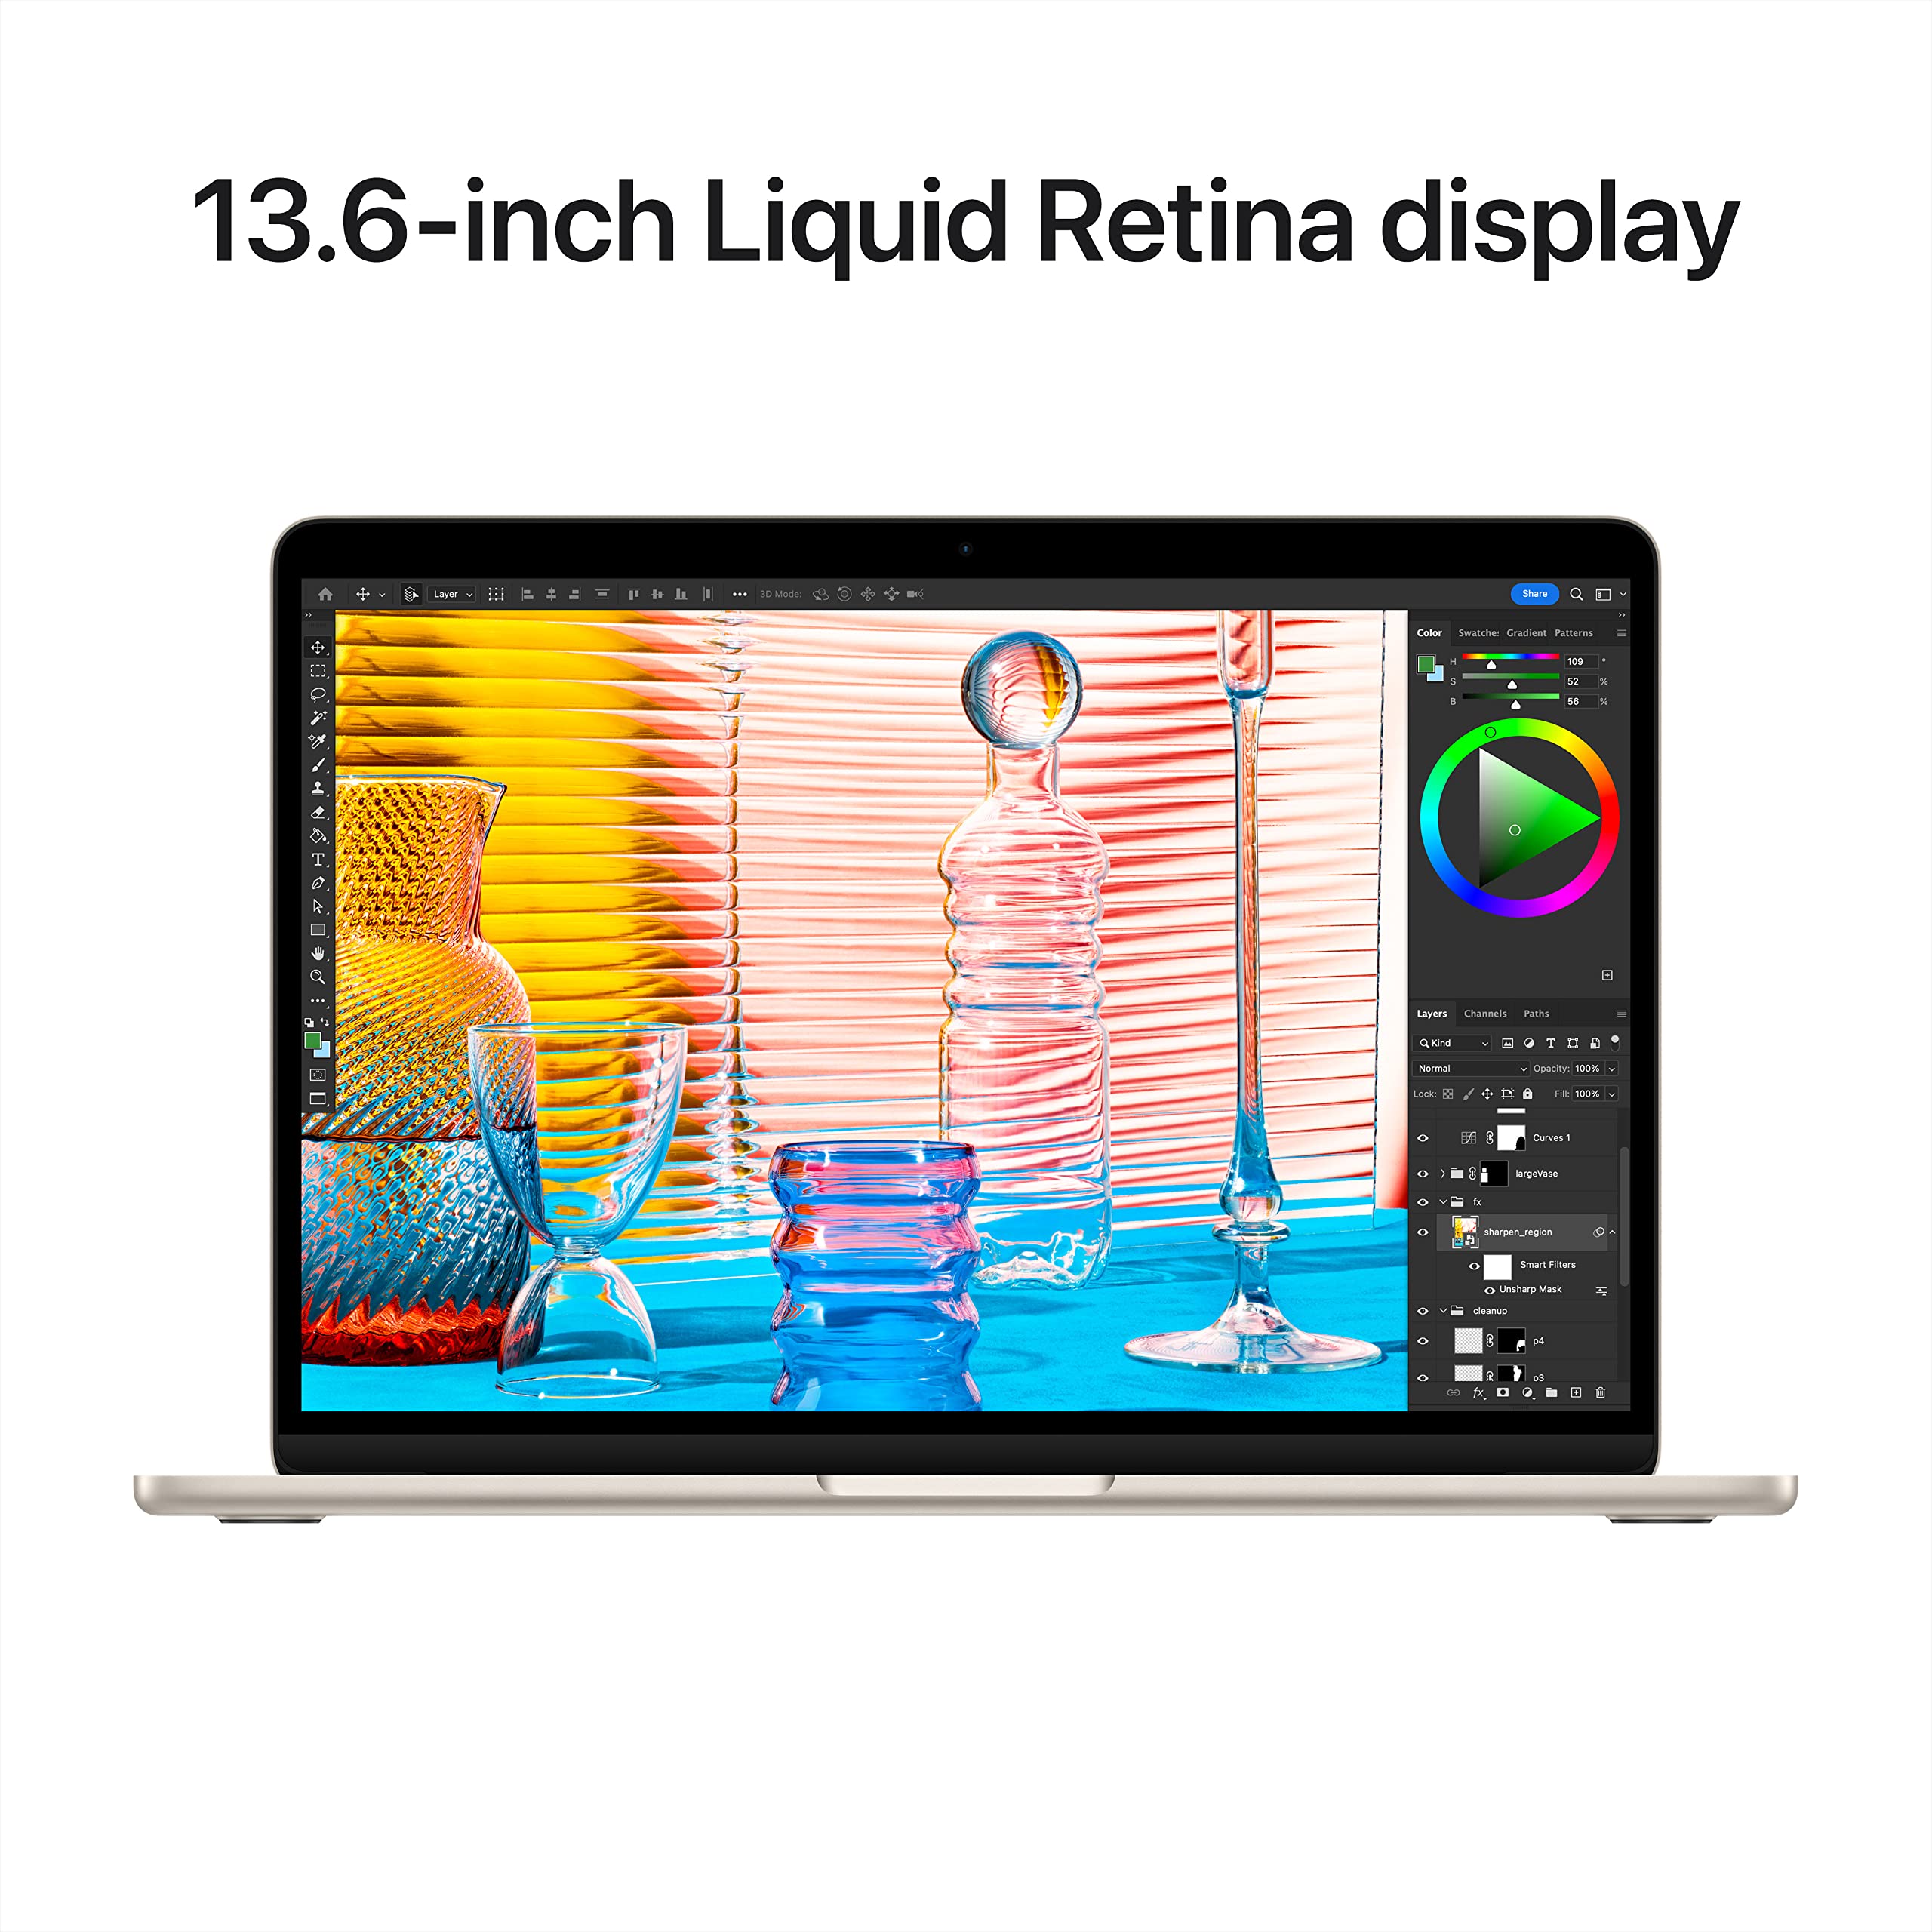 Apple 2022 MacBook Air Laptop with M2 chip: 13.6-inch Liquid Retina Display, 8GB RAM, 512GB SSD Storage, Backlit Keyboard, 1080p FaceTime HD Camera. Works with iPhone and iPad; Starlight